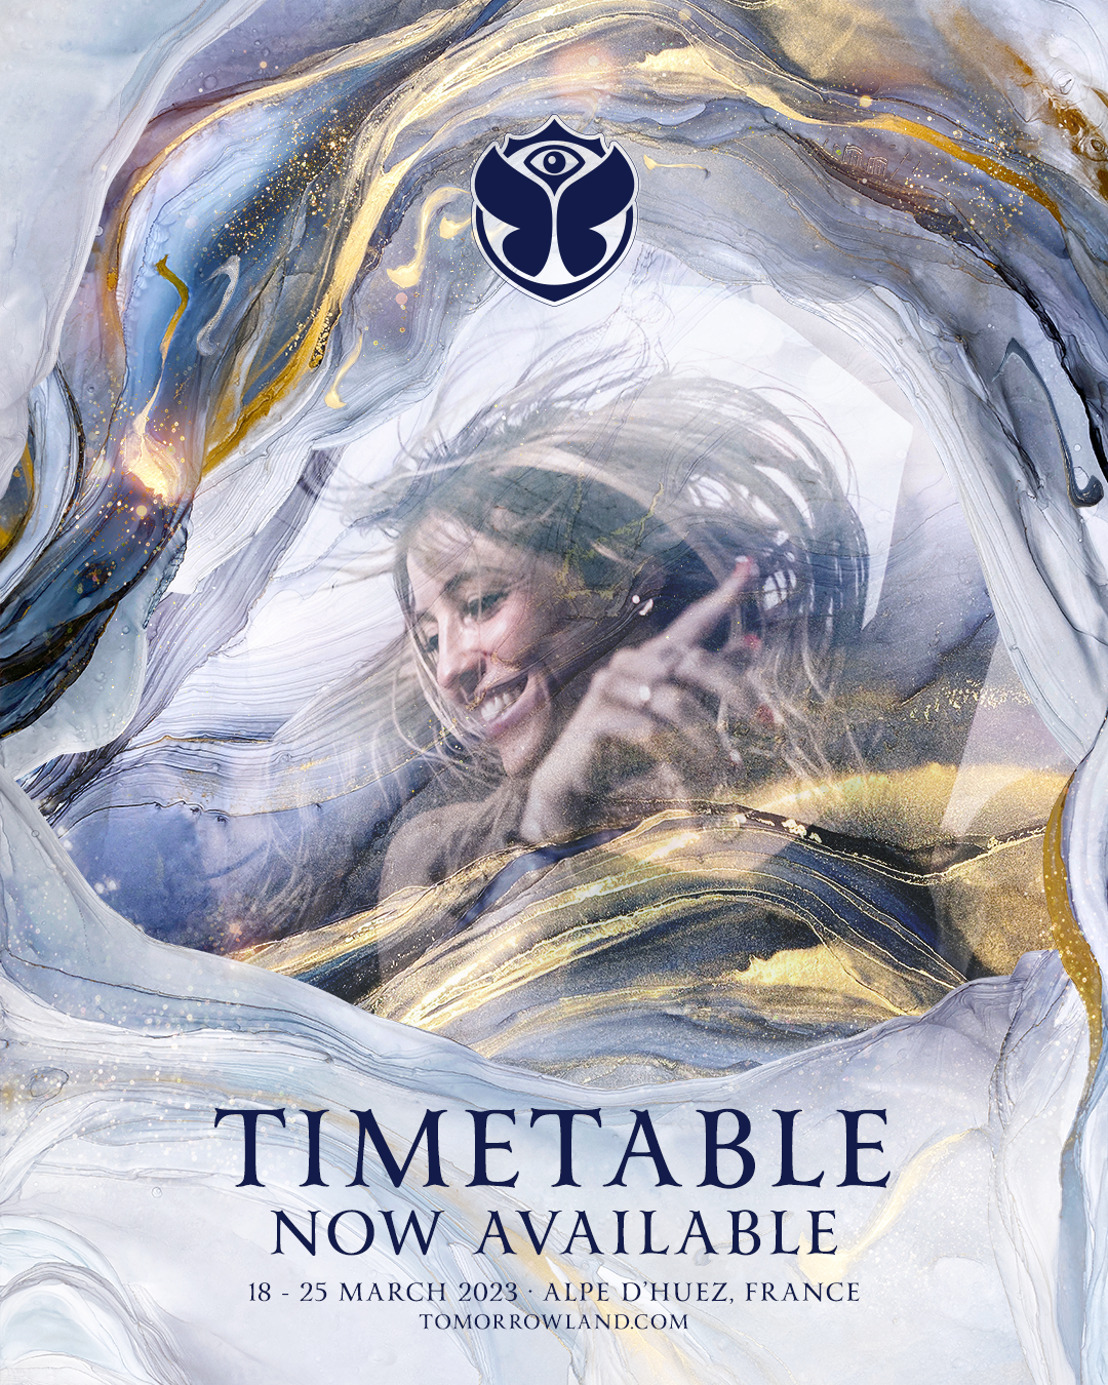 Tomorrowland Winter unveils the full 2023 line-up and timetable